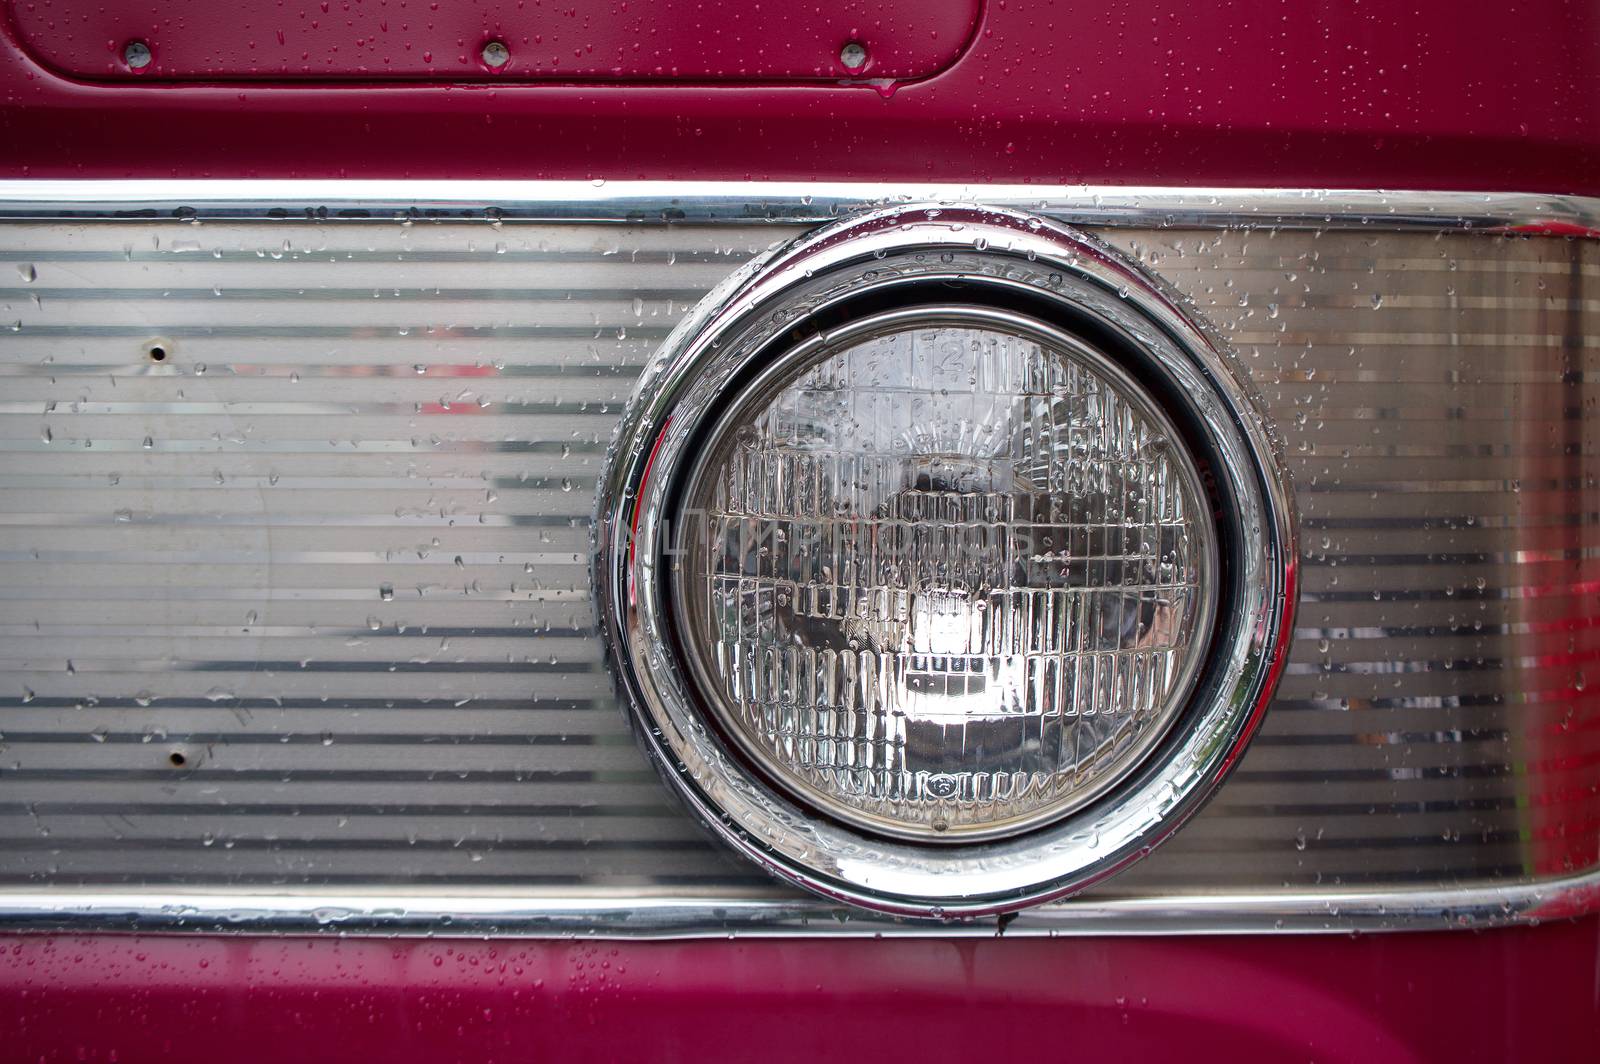 The headlamp on an old car, with raindrops.